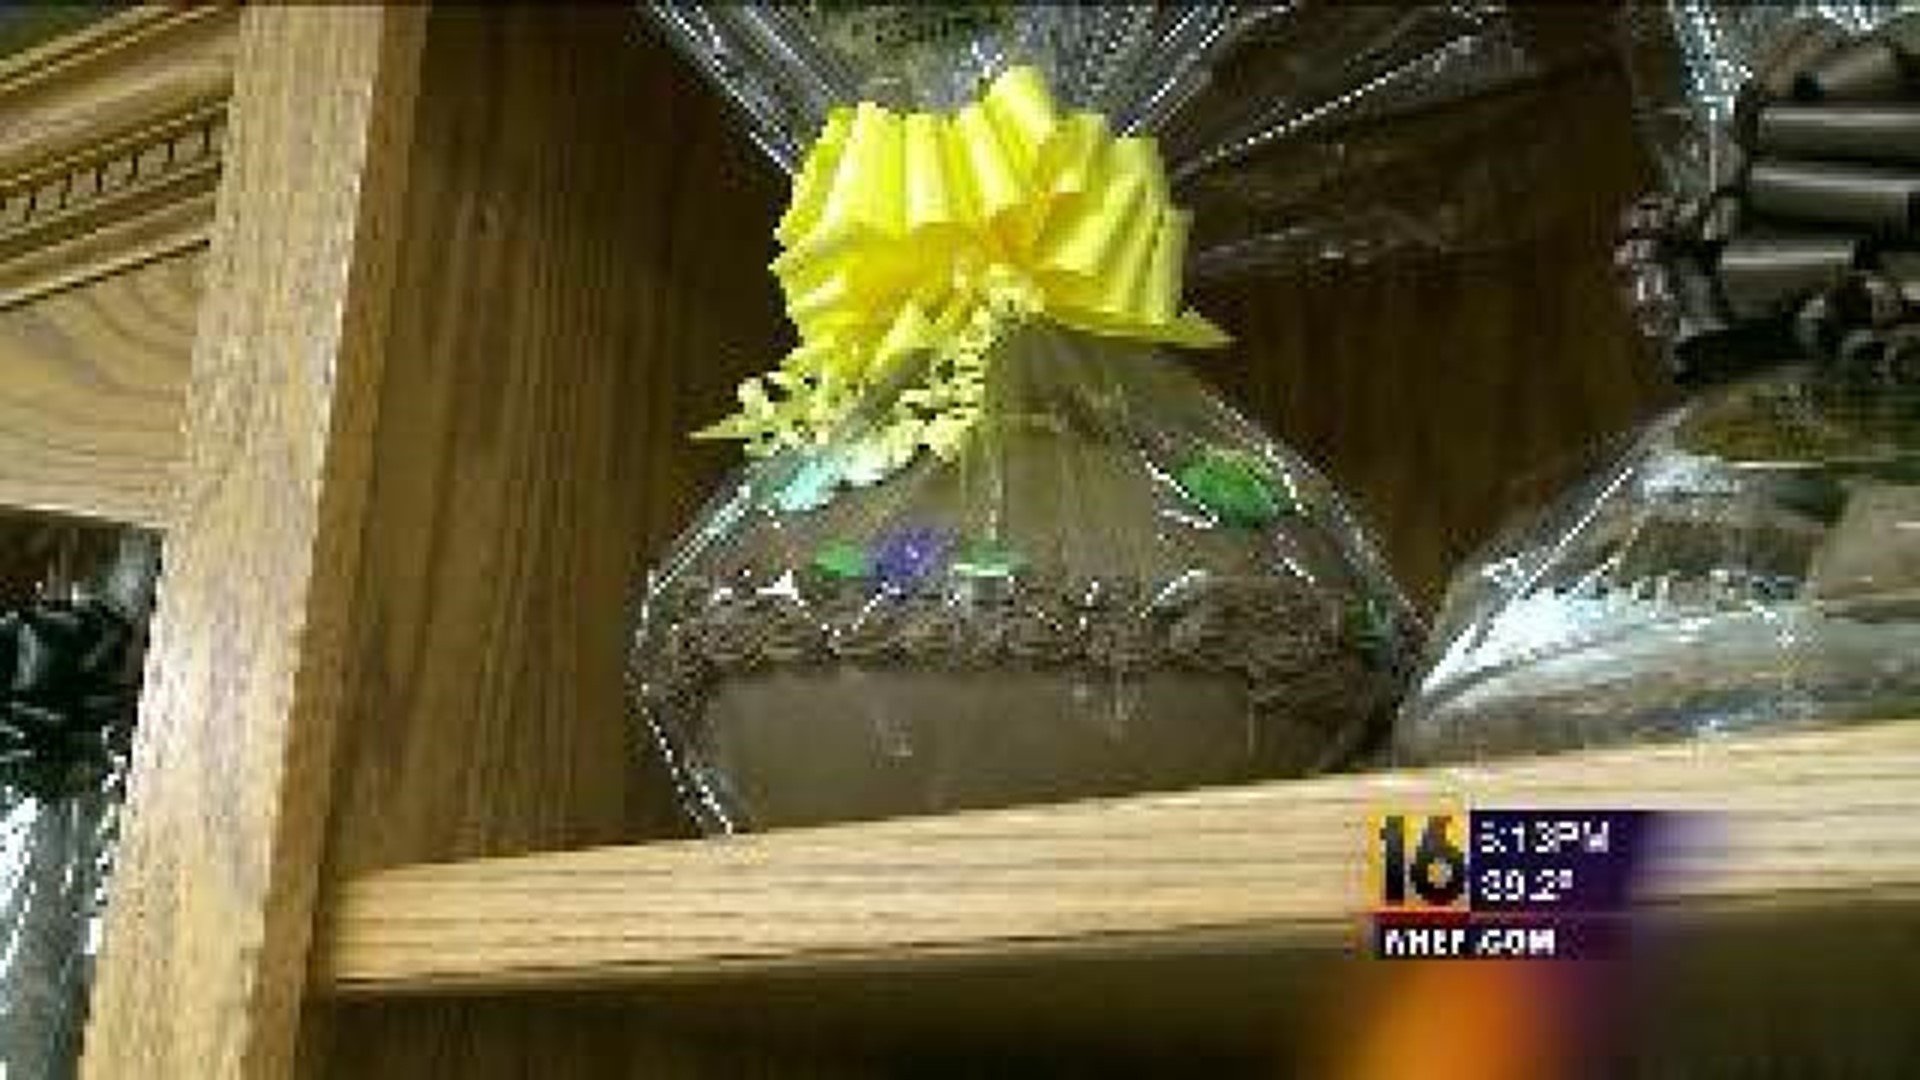 Chocolate Eggs, Gourmet Cheeses, Big Sellers For Easter